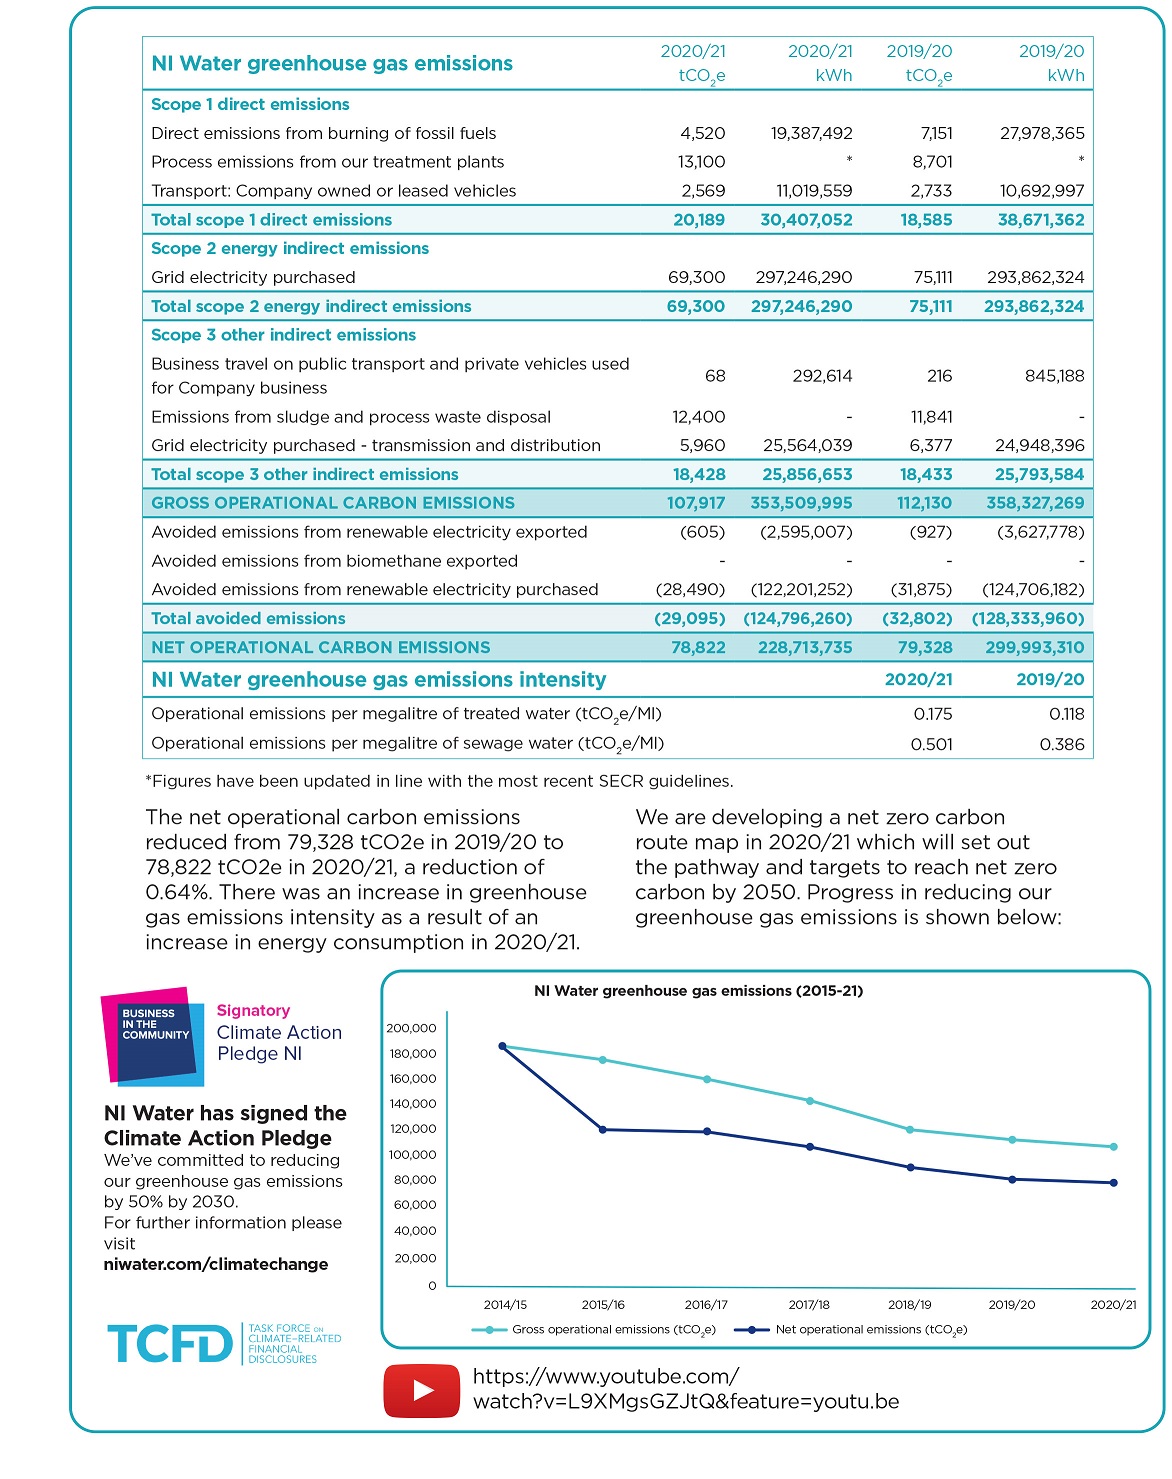 NI Water greenhouse gas emissions table of figures